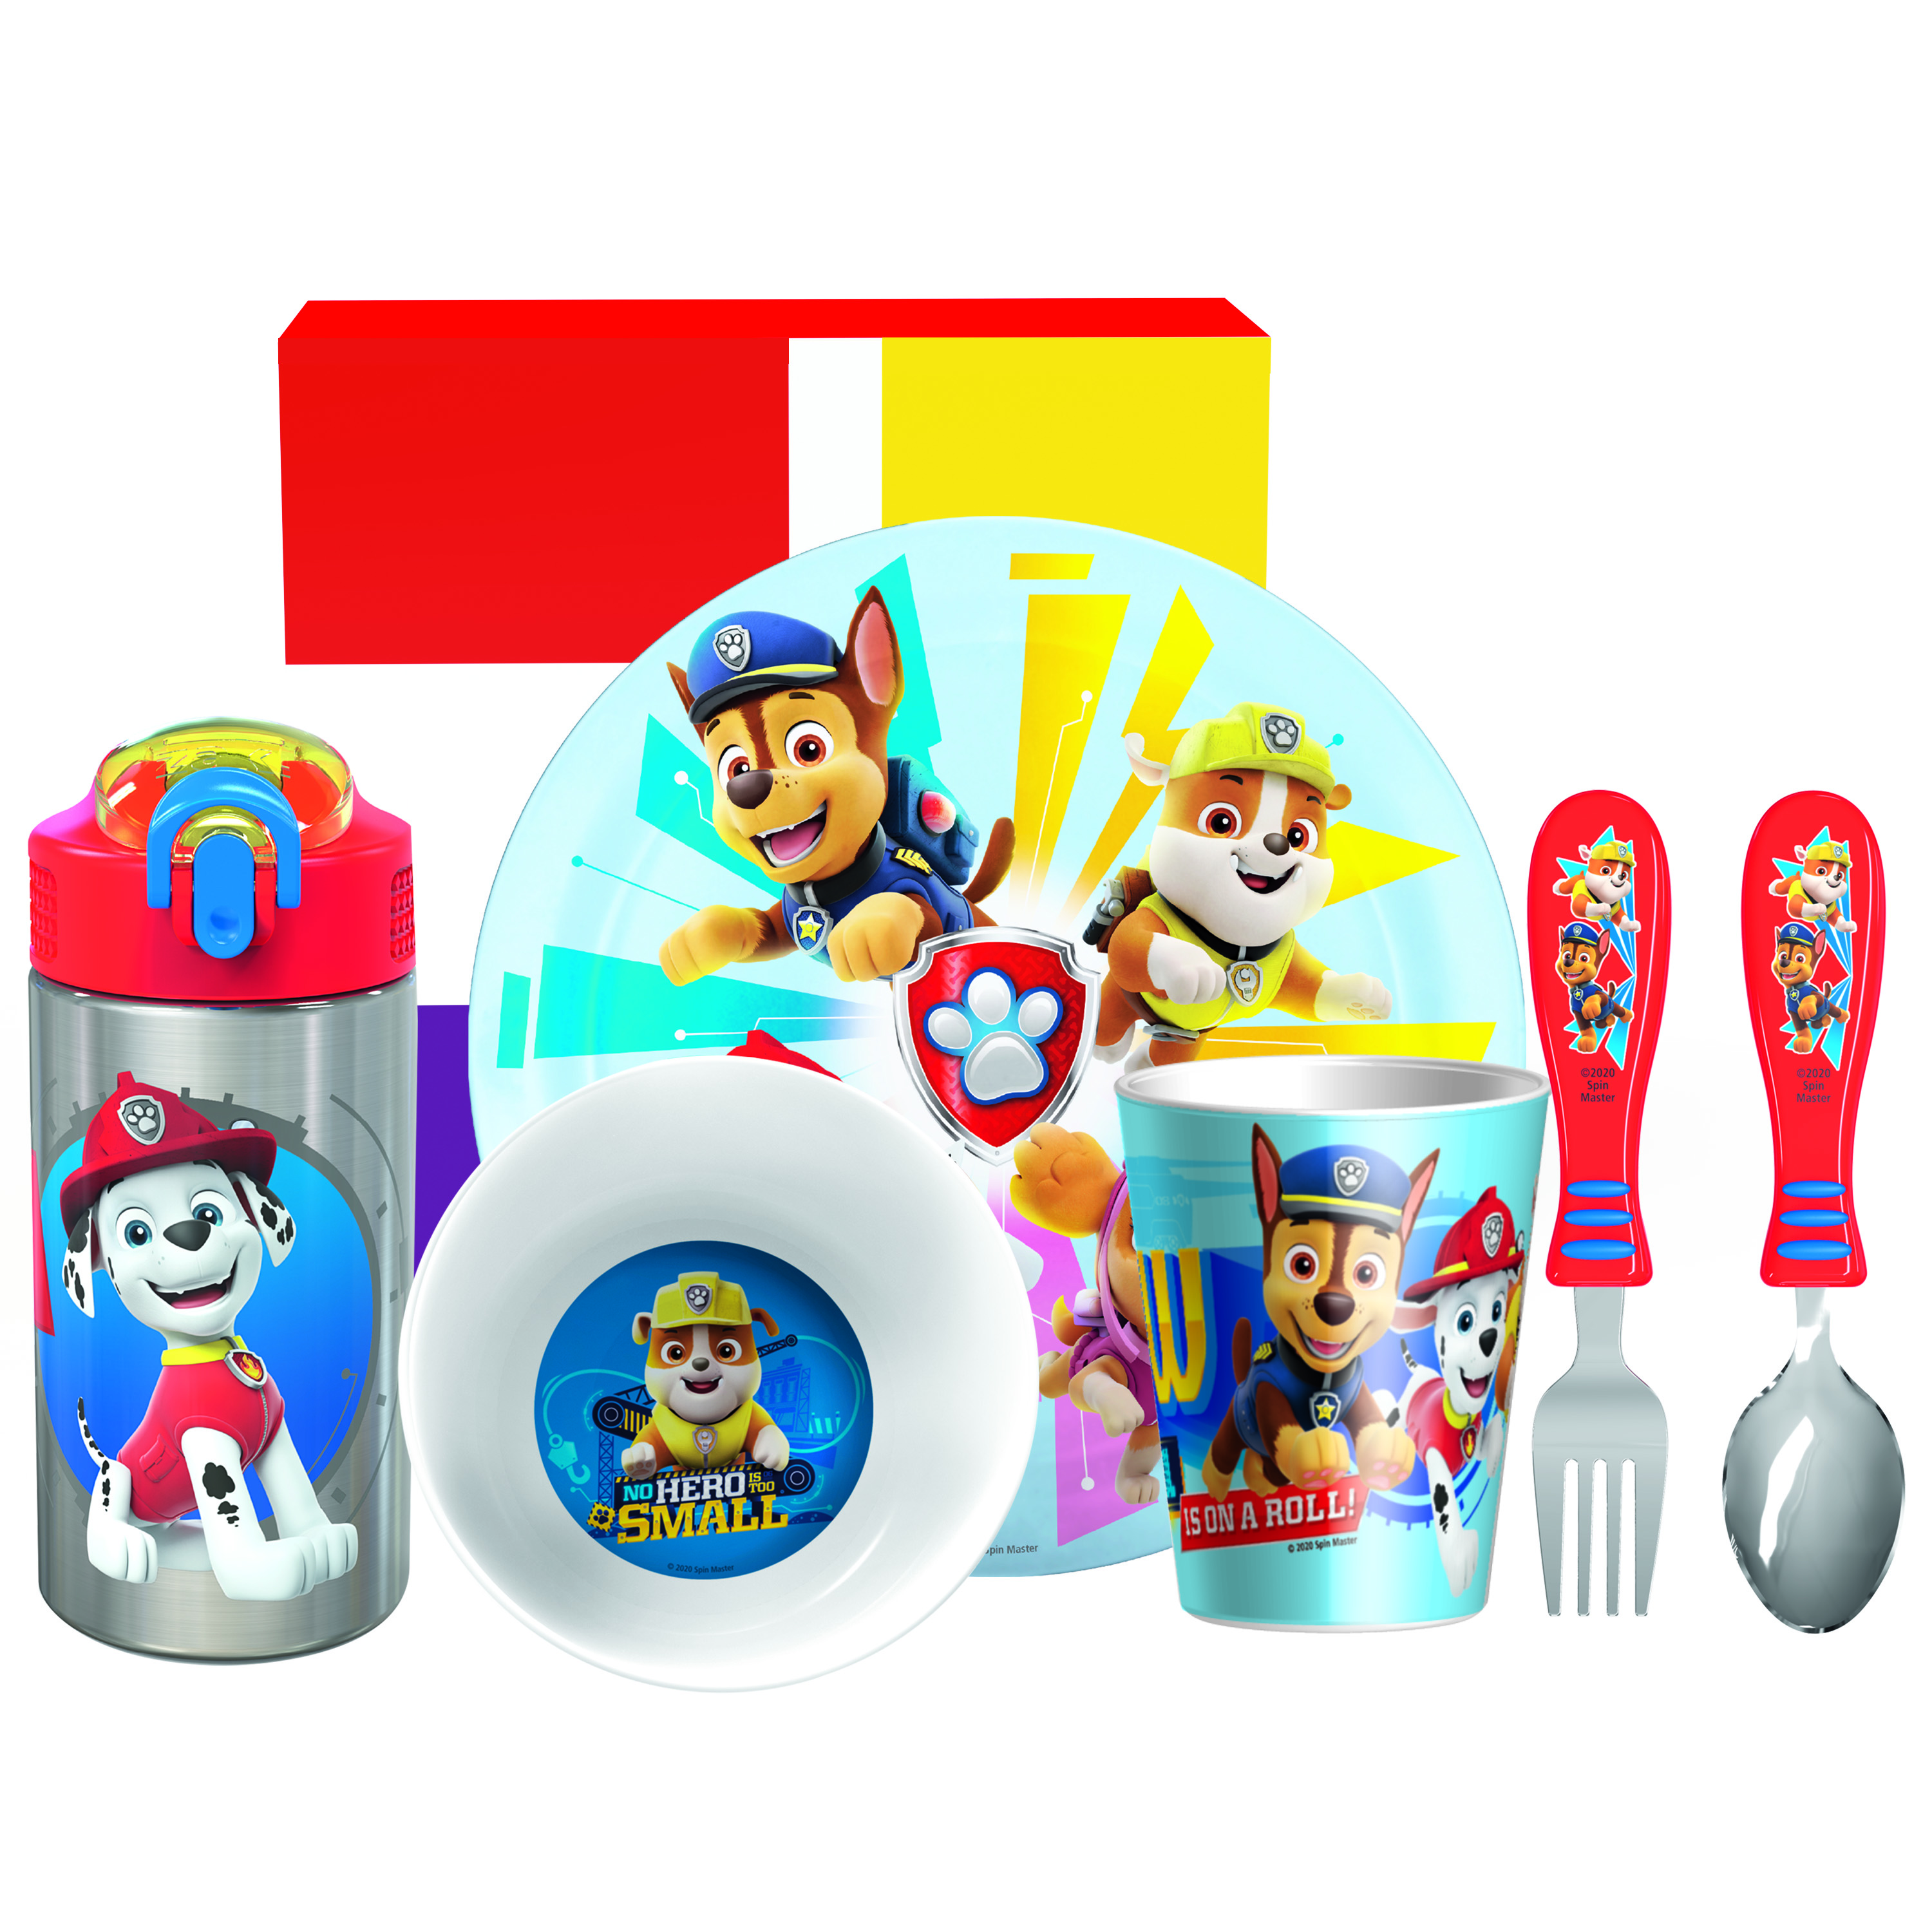 Bowl Zak Designs Paw Patrol Dinnerware 5 Piece Set Includes Plate Non-BPA Made of Durable Material and Perfect for Kids Water Bottle and Utensil Tableware 